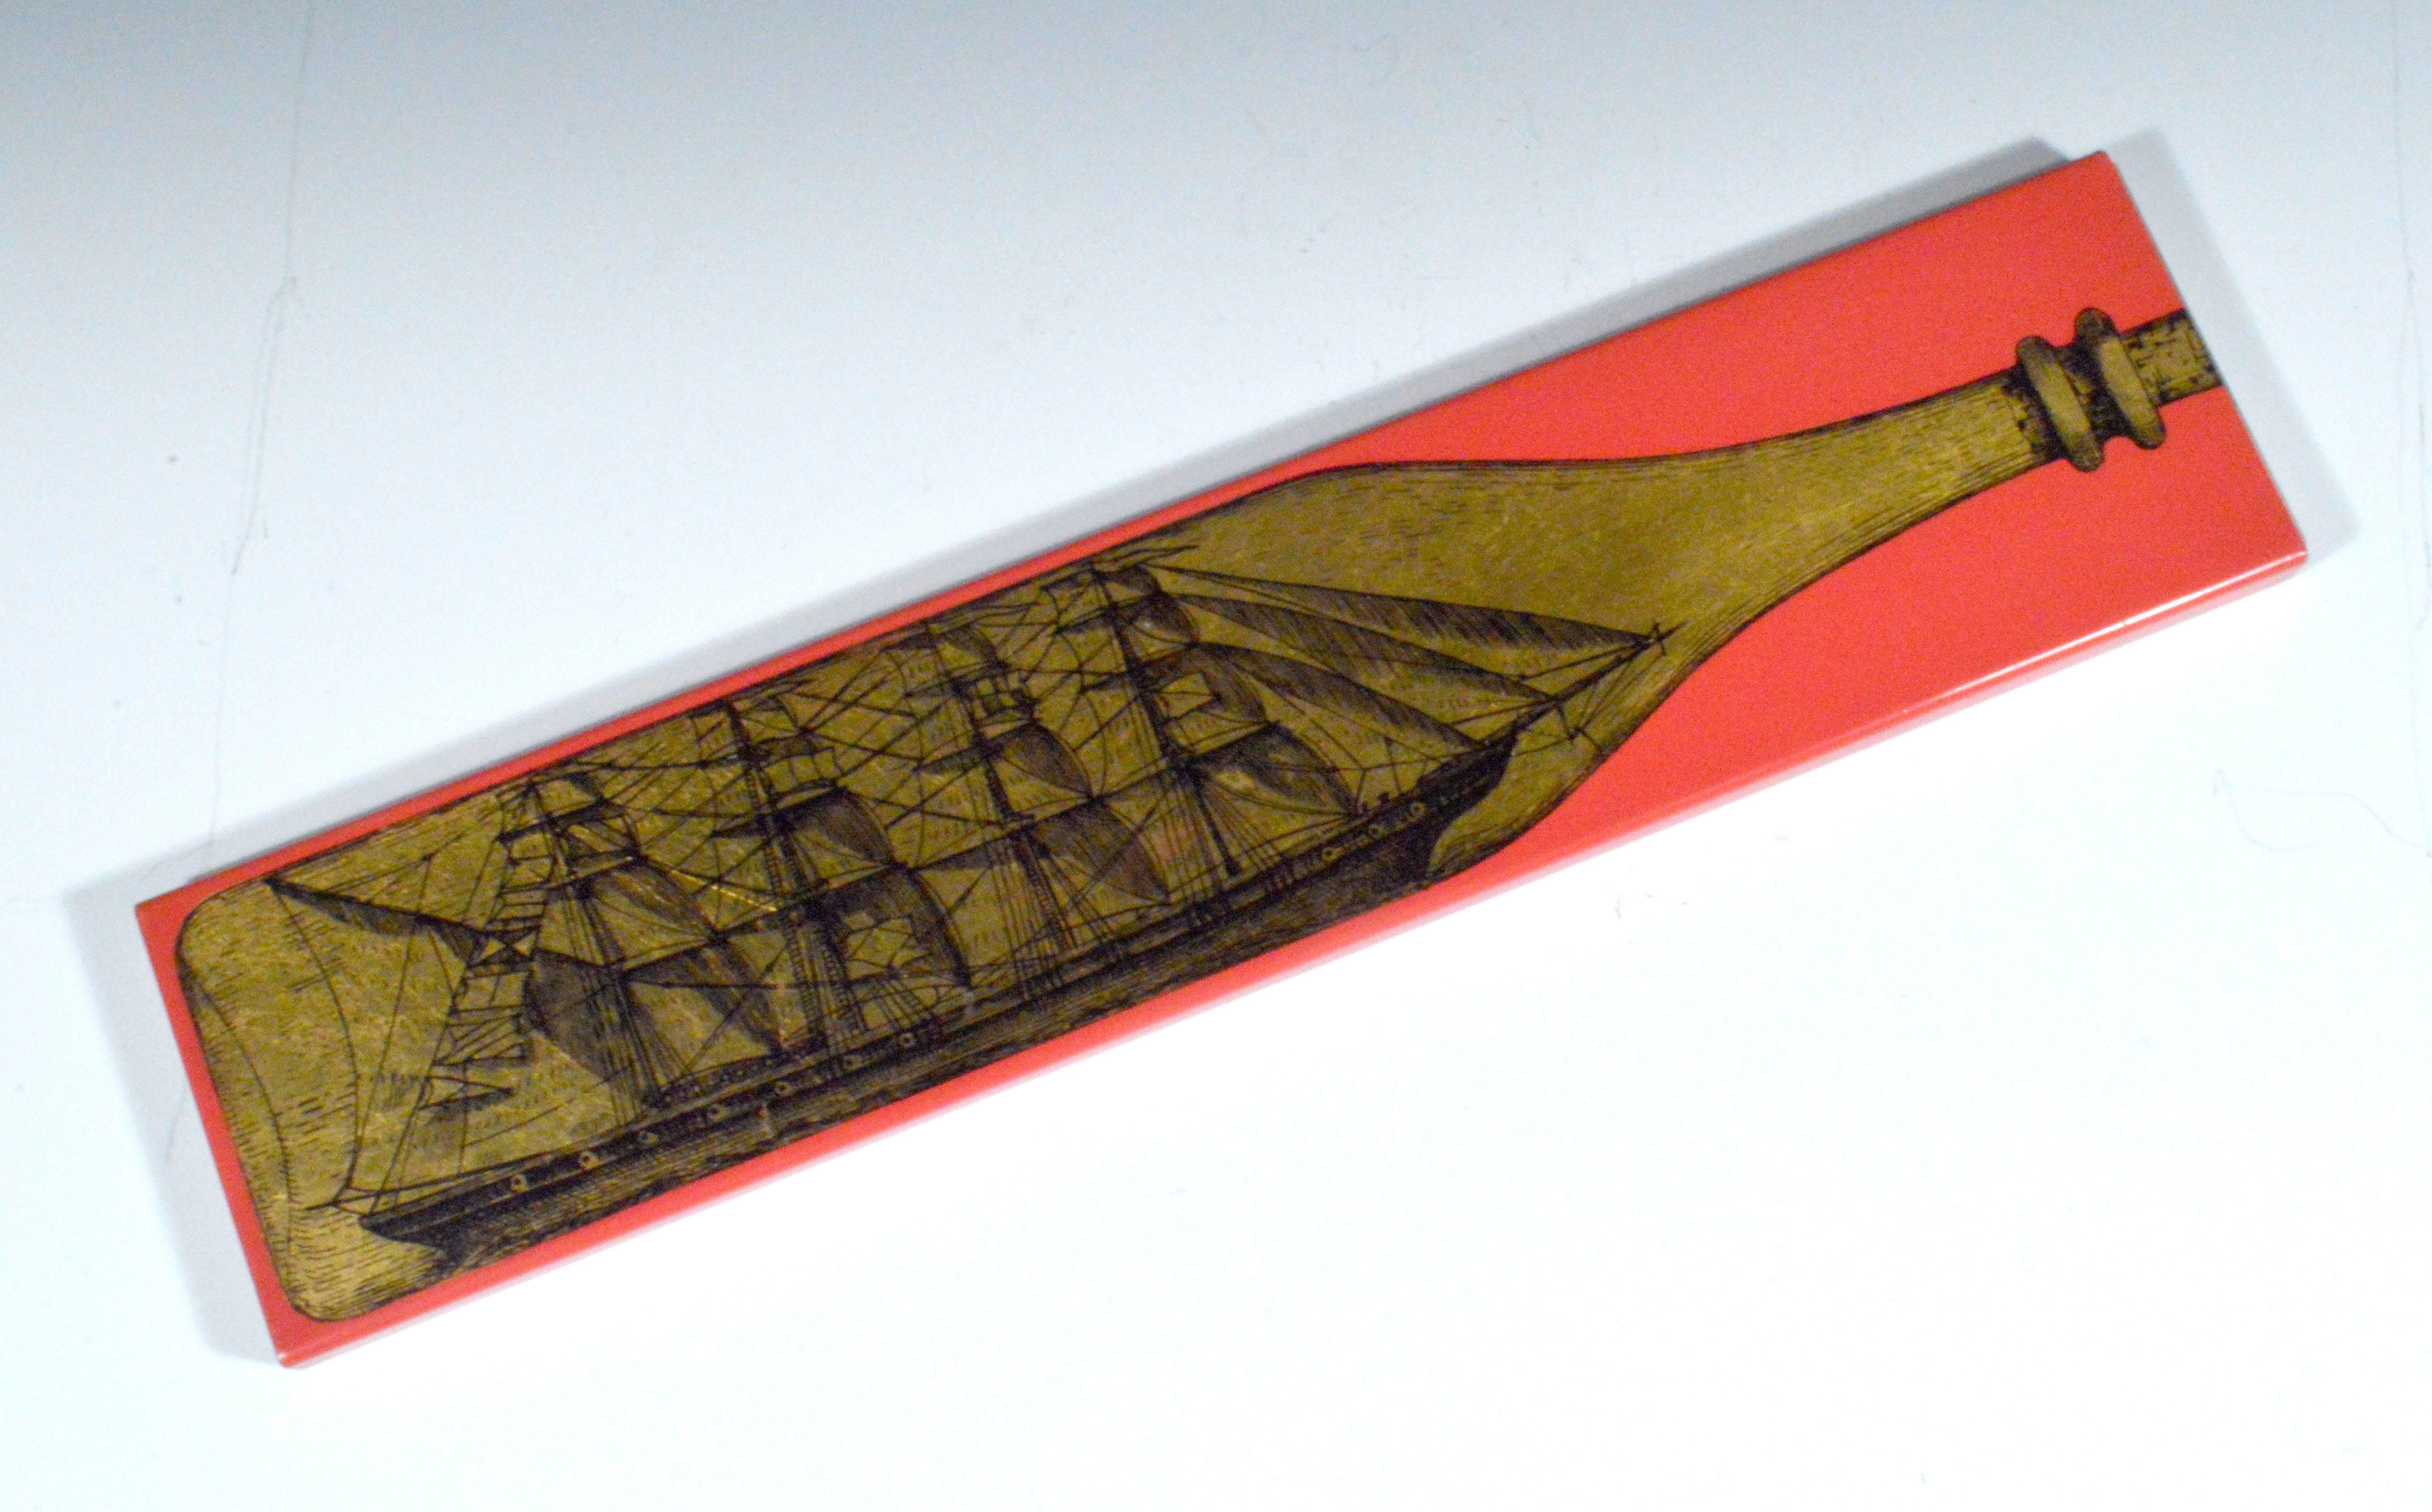 Vintage Piero Fornasetti long cigarette box with ship in a bottle design,
Bottiglia (Bottle),
1960s.

The Piero Fornasetti ship in a bottle design metal box has a red ground. There is a red felt base stamped in gold with the Fornasetti